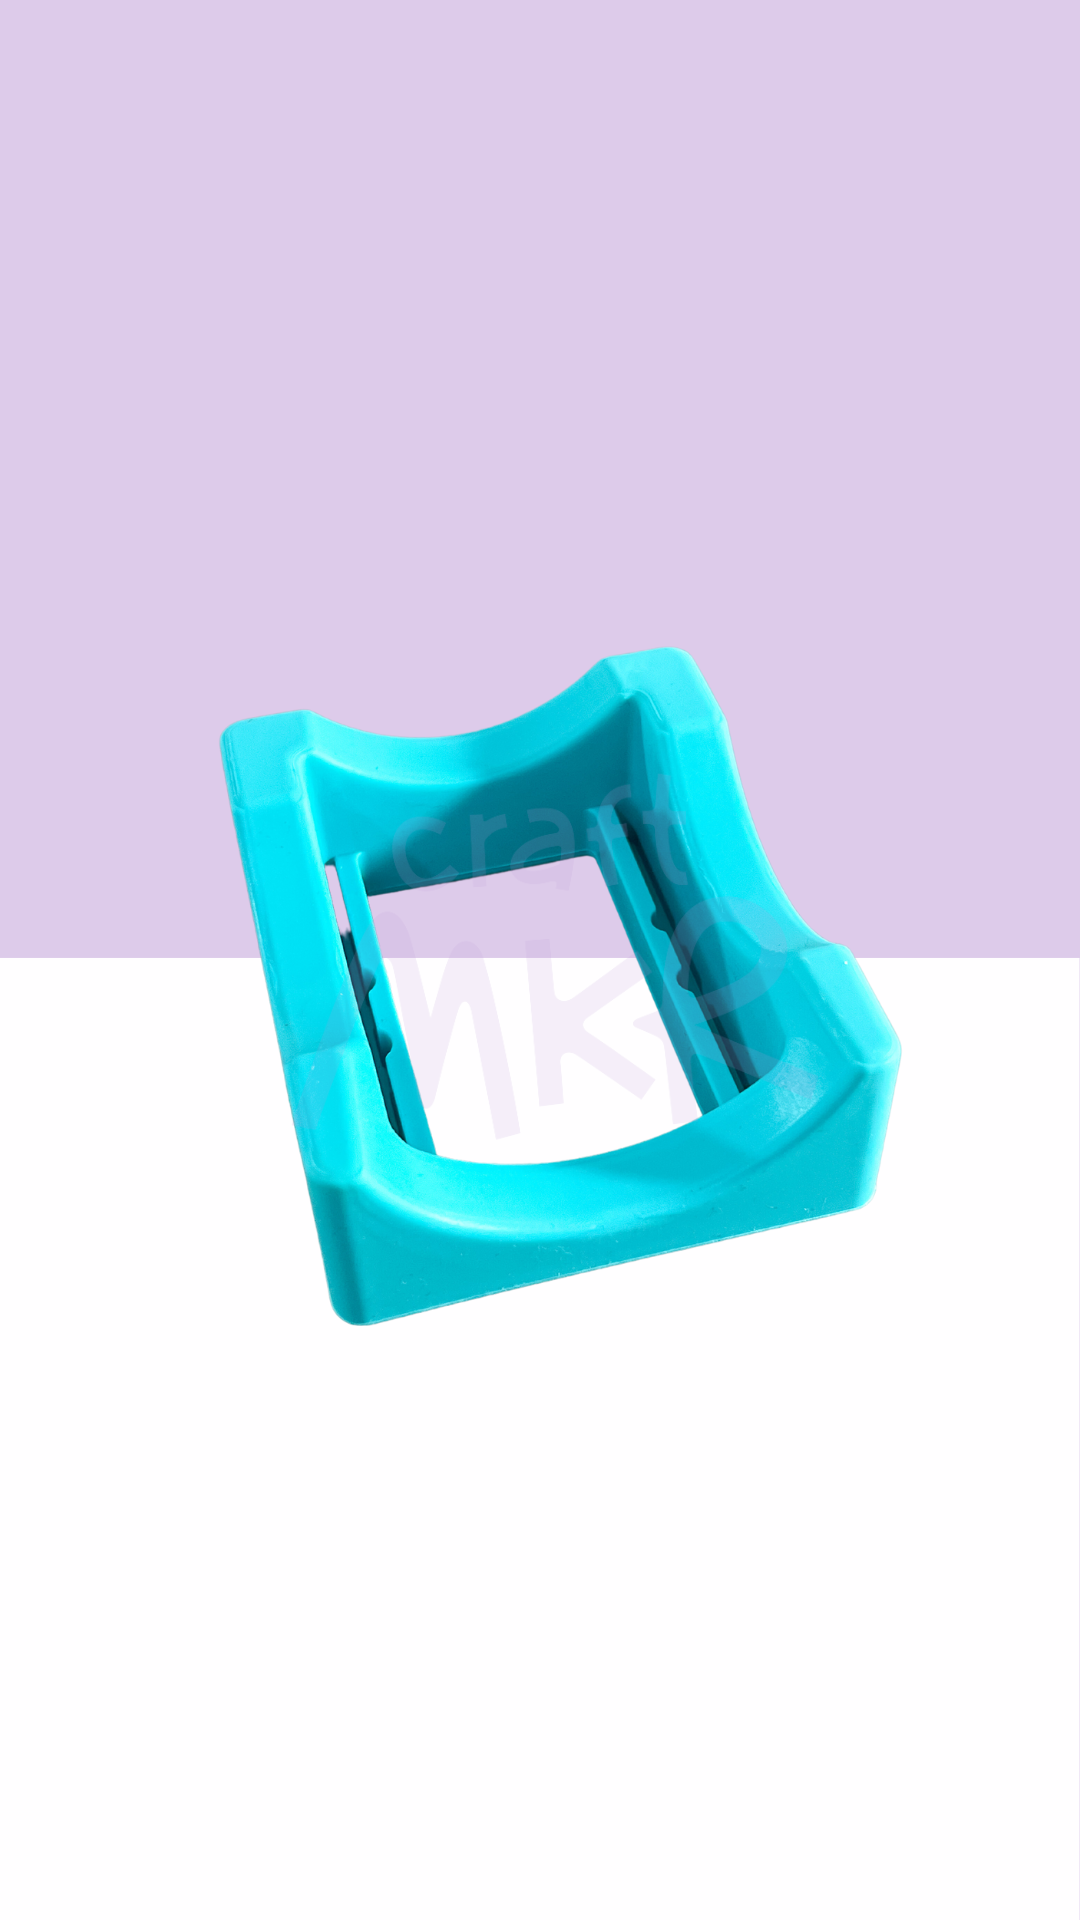 Tumbler Cradle Holder for Crafts, Silicone Non-Slip Cup Holder for